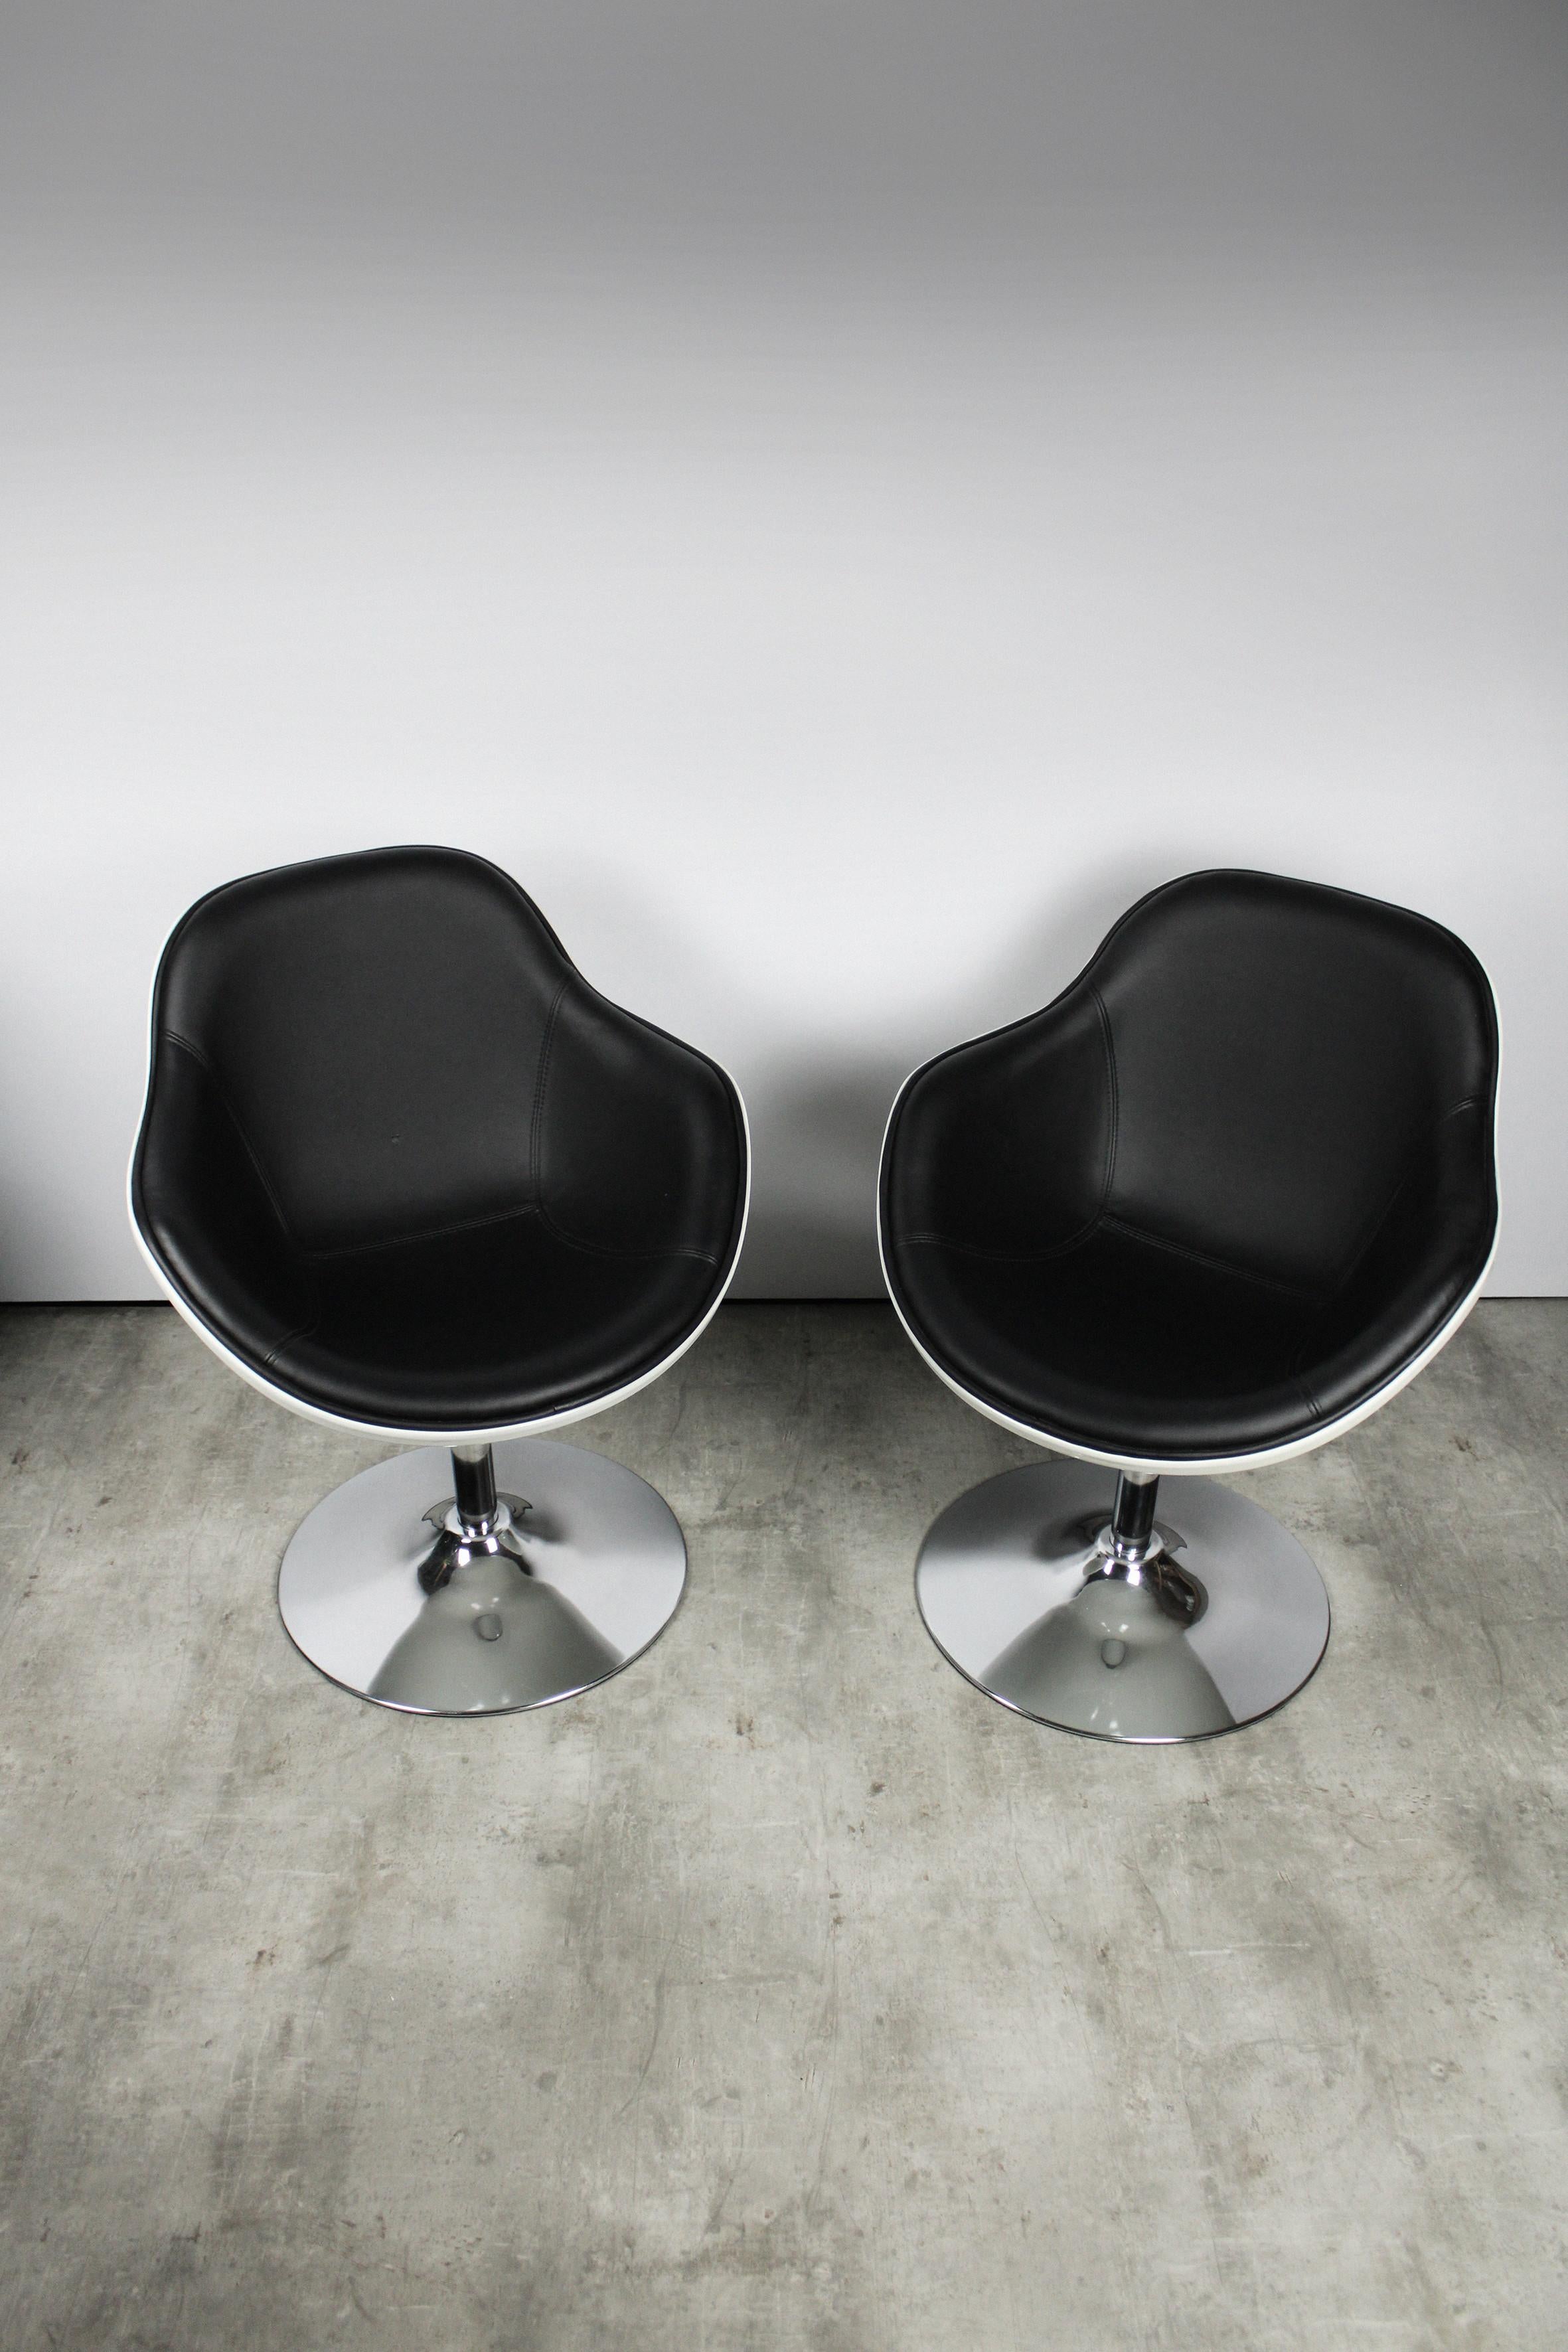 Dutch Set of Two Armchairs Space Age Tequila White Epoxy Vintage Black Leather For Sale